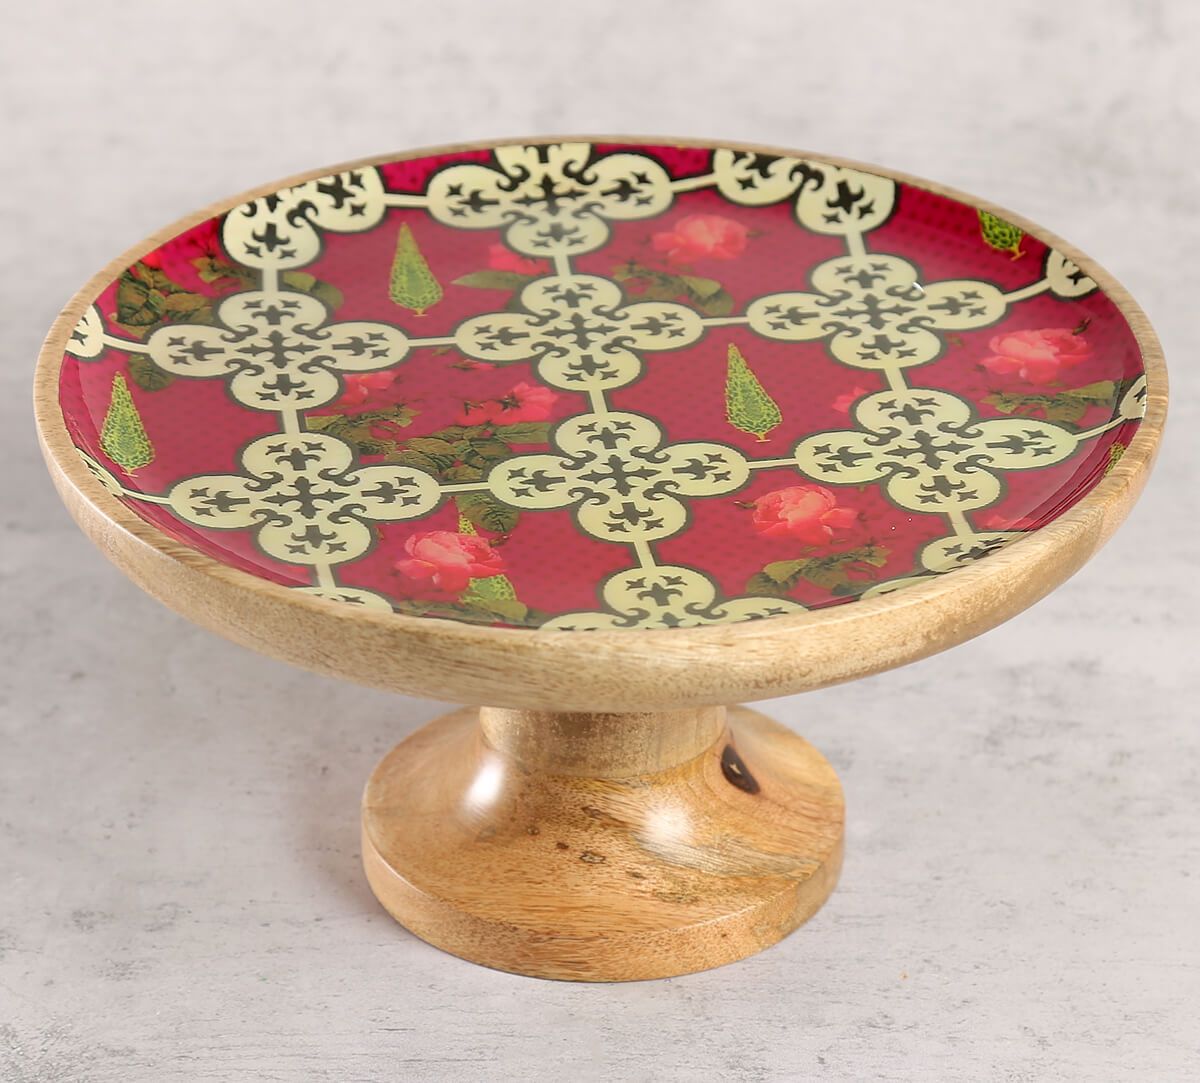 Cup Cake Stand / Hamper – 2 Tier – 13×6.25 – Gold - House2home-h2h  Manufacture Metal Wood & Glass handicrafts, Moradabad, India